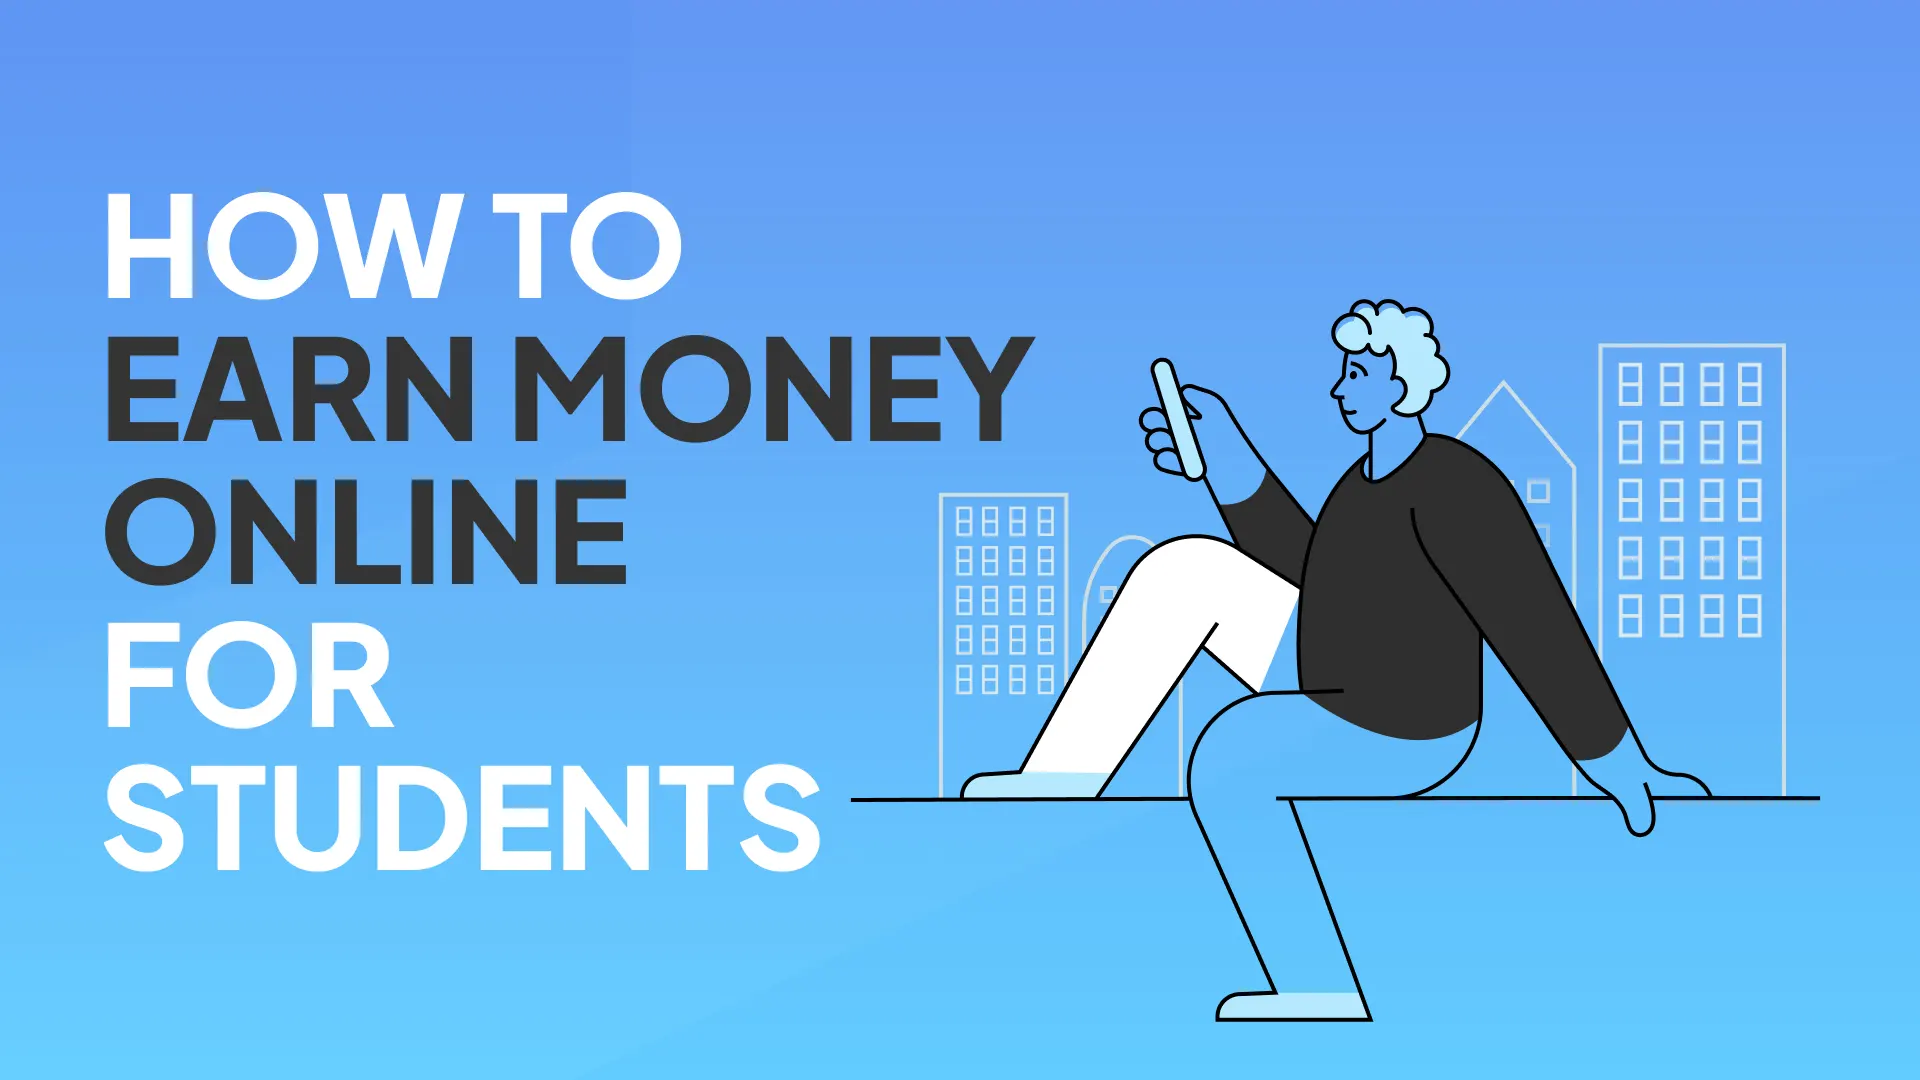 How to earn Money online for Students